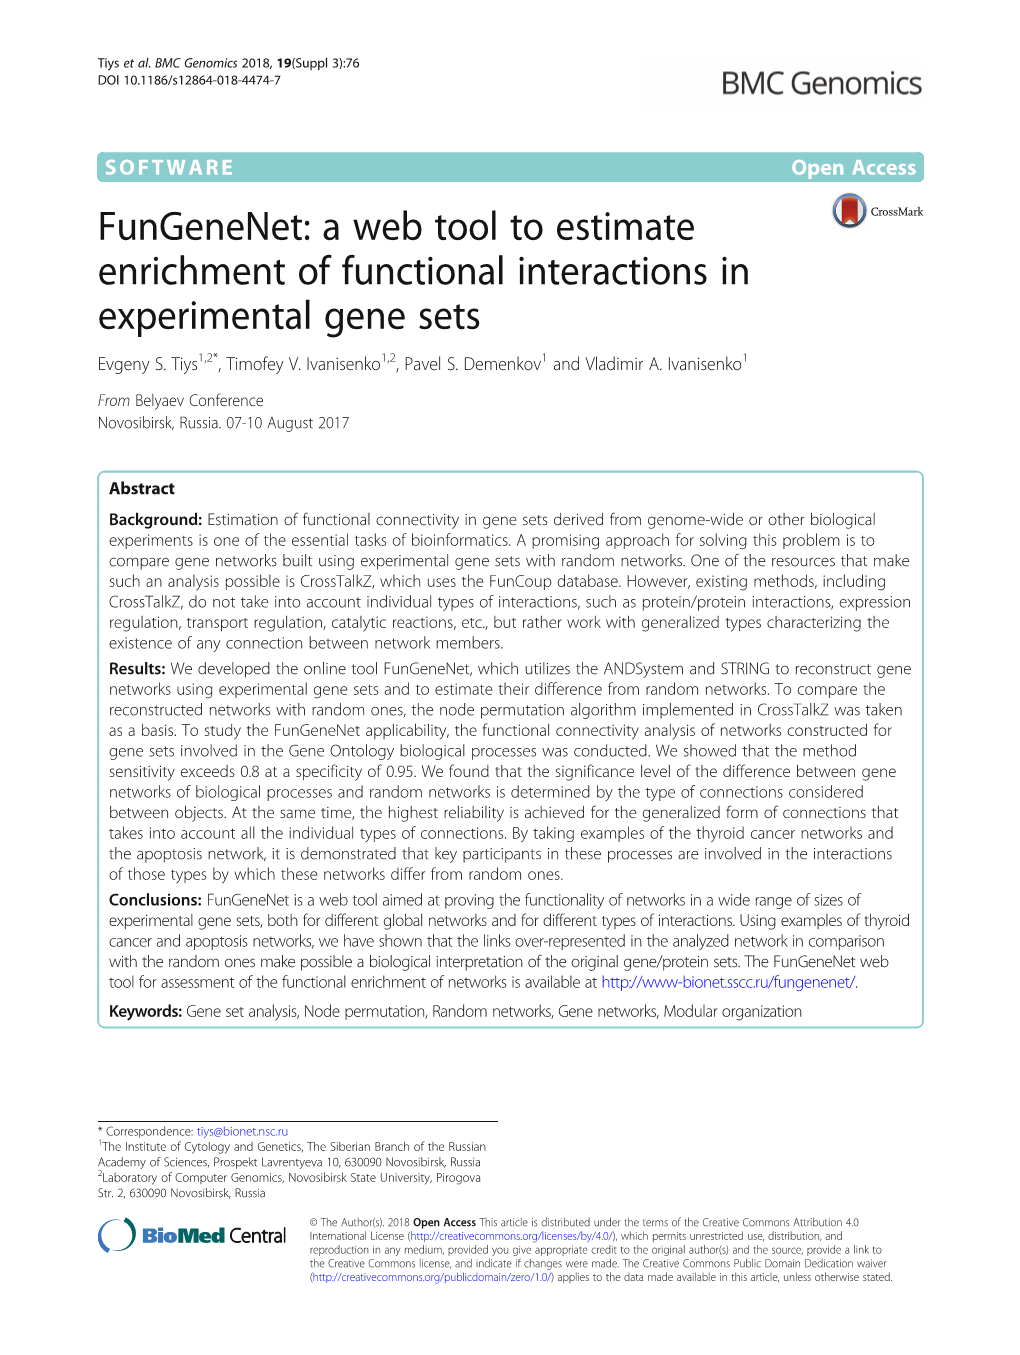 Fungenenet: a Web Tool to Estimate Enrichment of Functional Interactions in Experimental Gene Sets Evgeny S